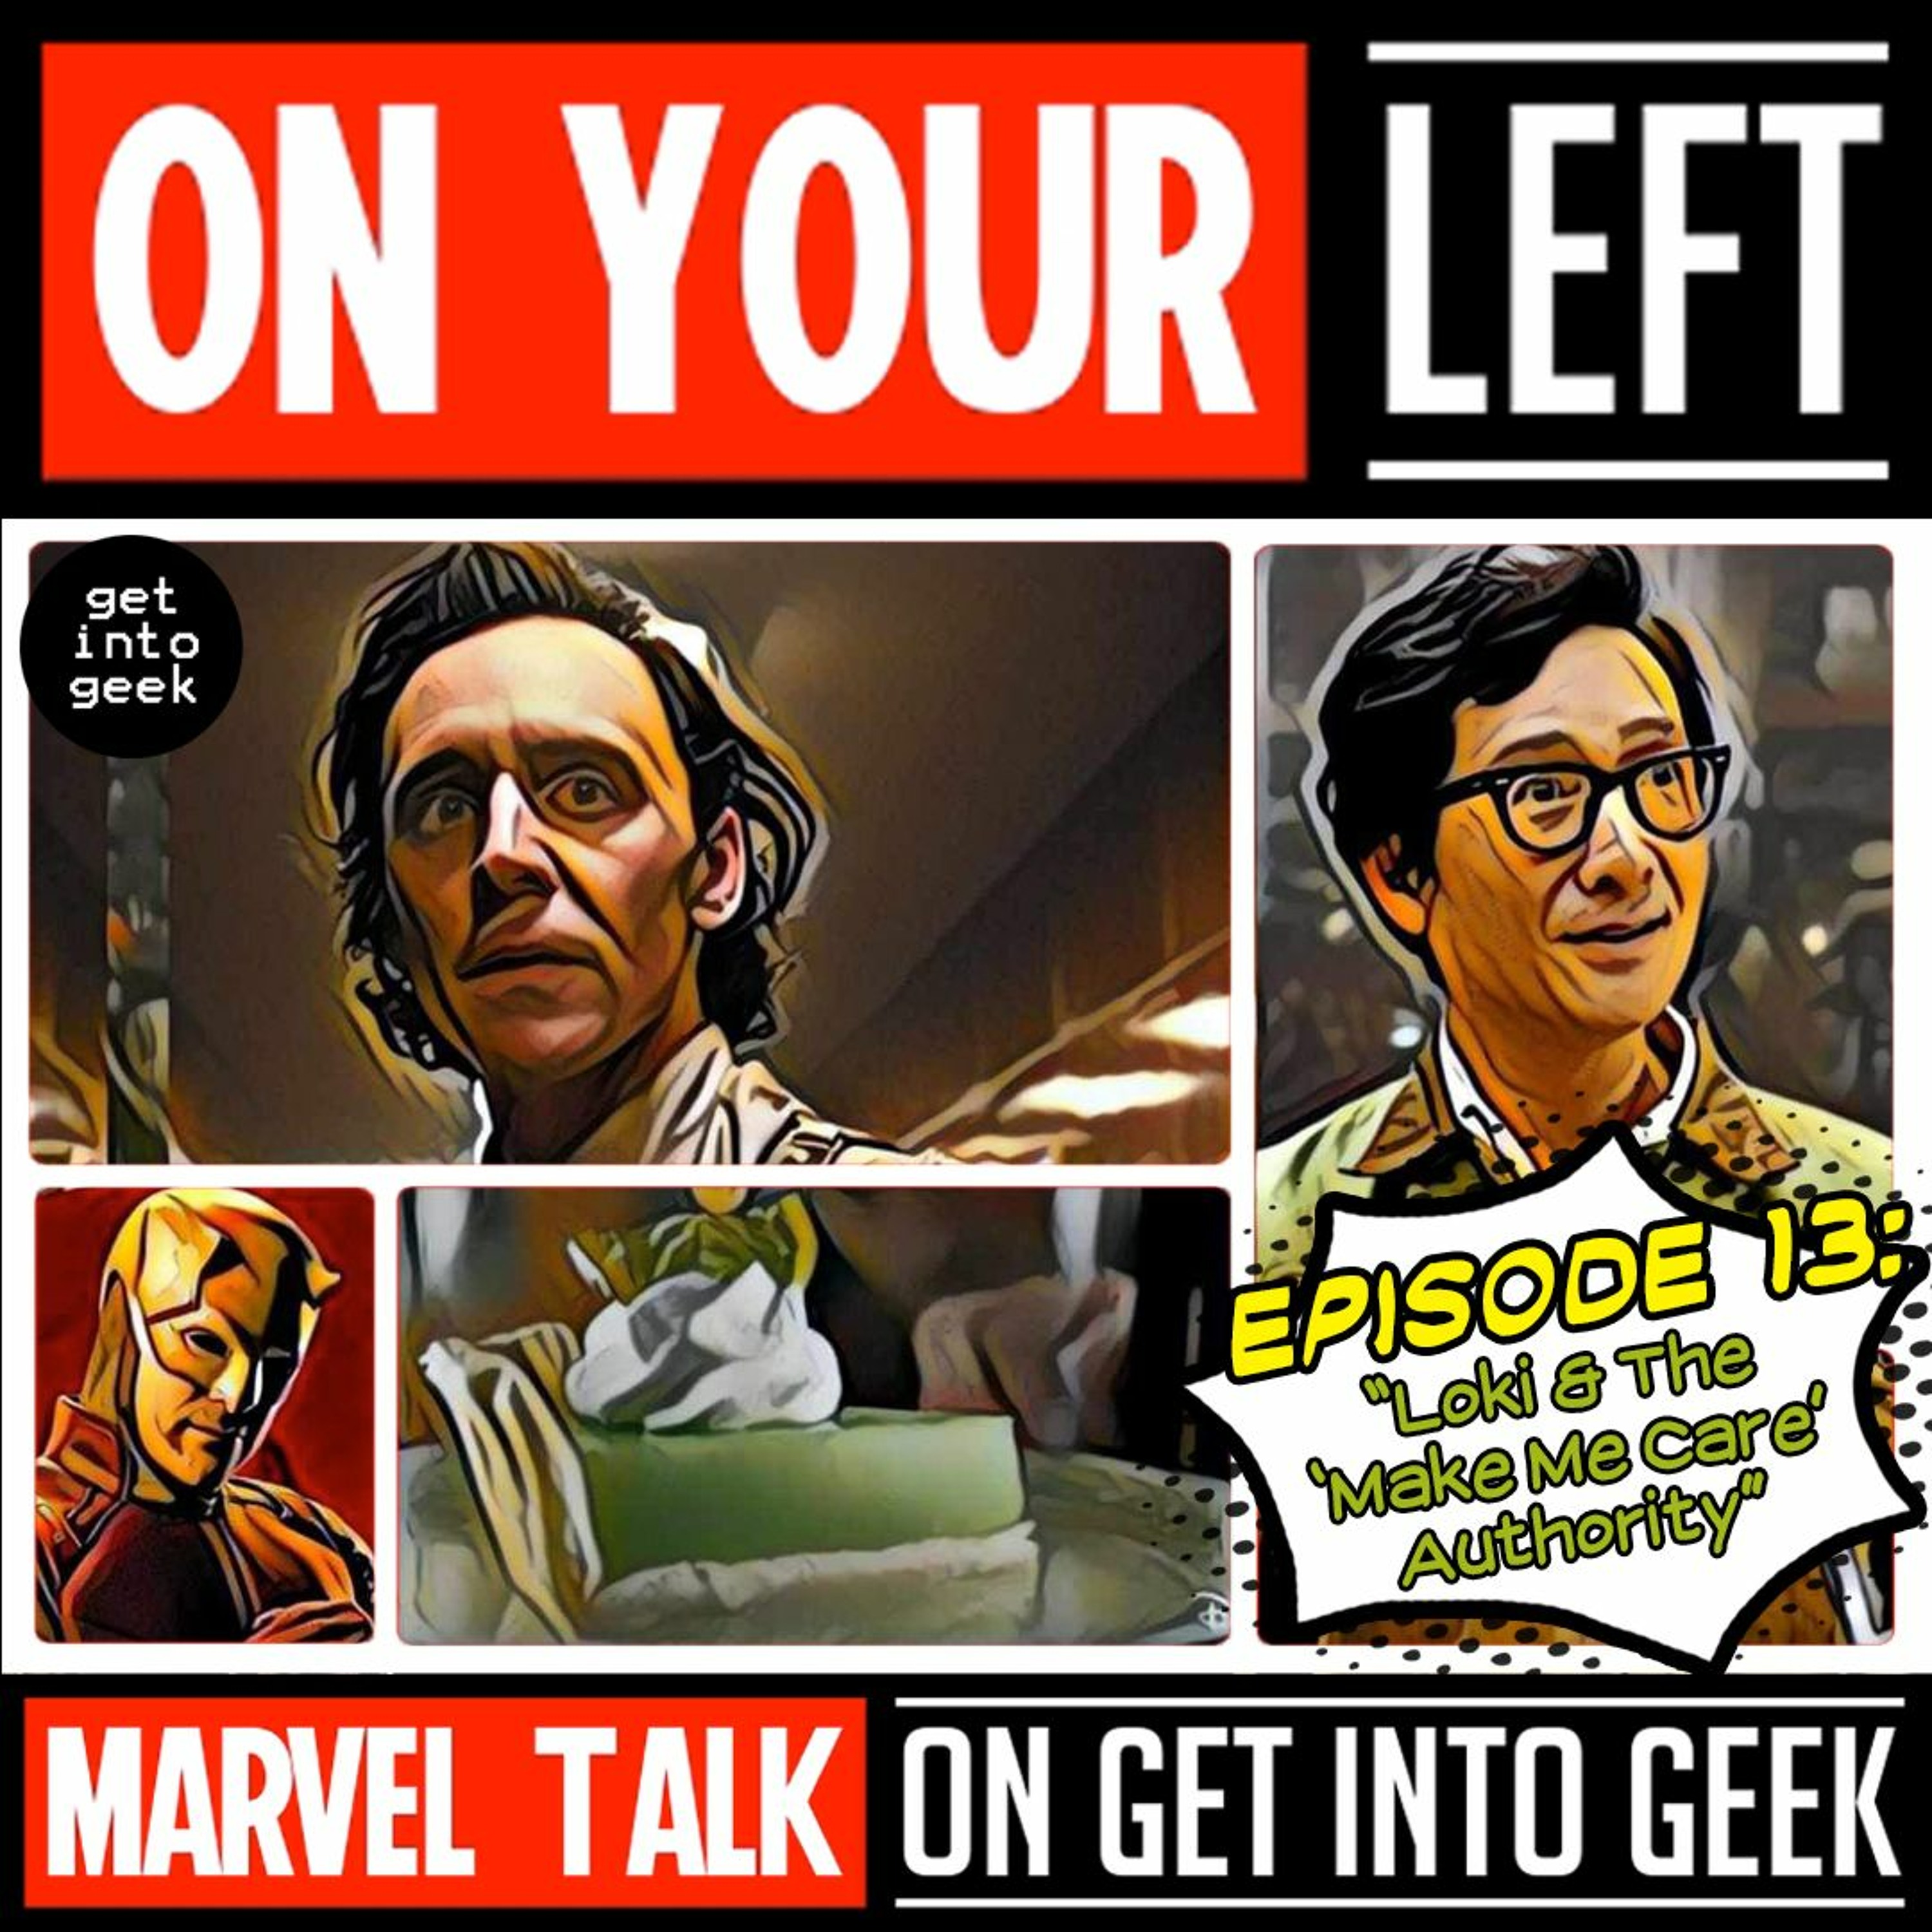 Loki & The 'Make Me Care' Authority (On Your Left - Marvel Talk Episode 1.13